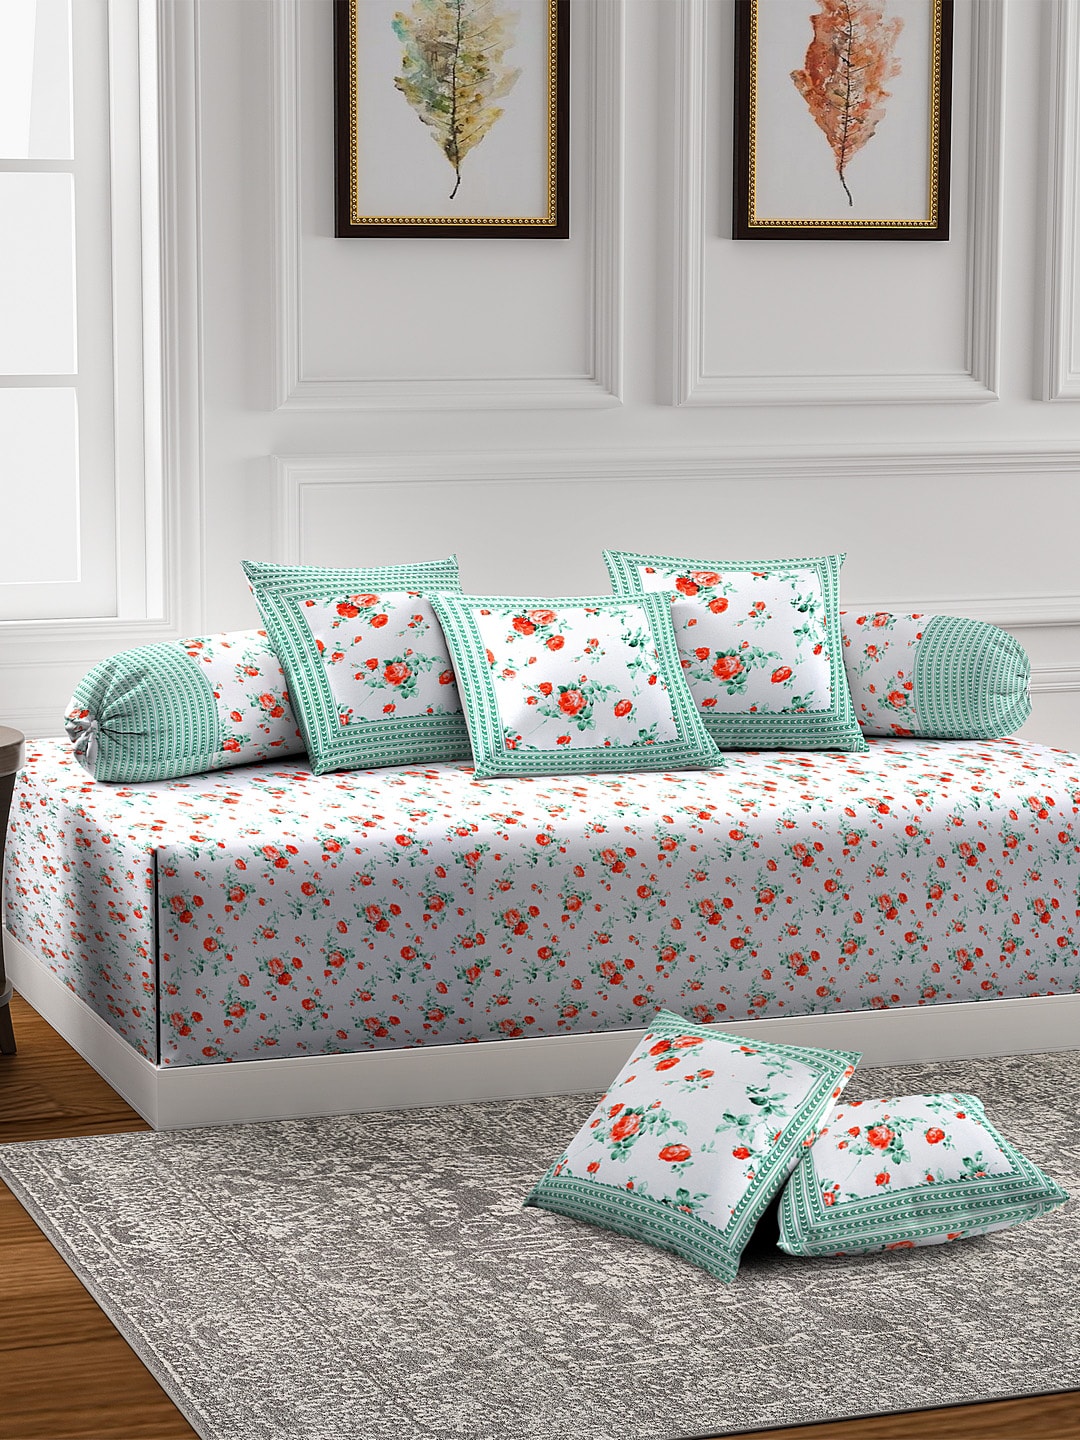 Rajasthan Decor Set of Floral Printed Single Bedsheet With Cushion & Bolster Covers Price in India